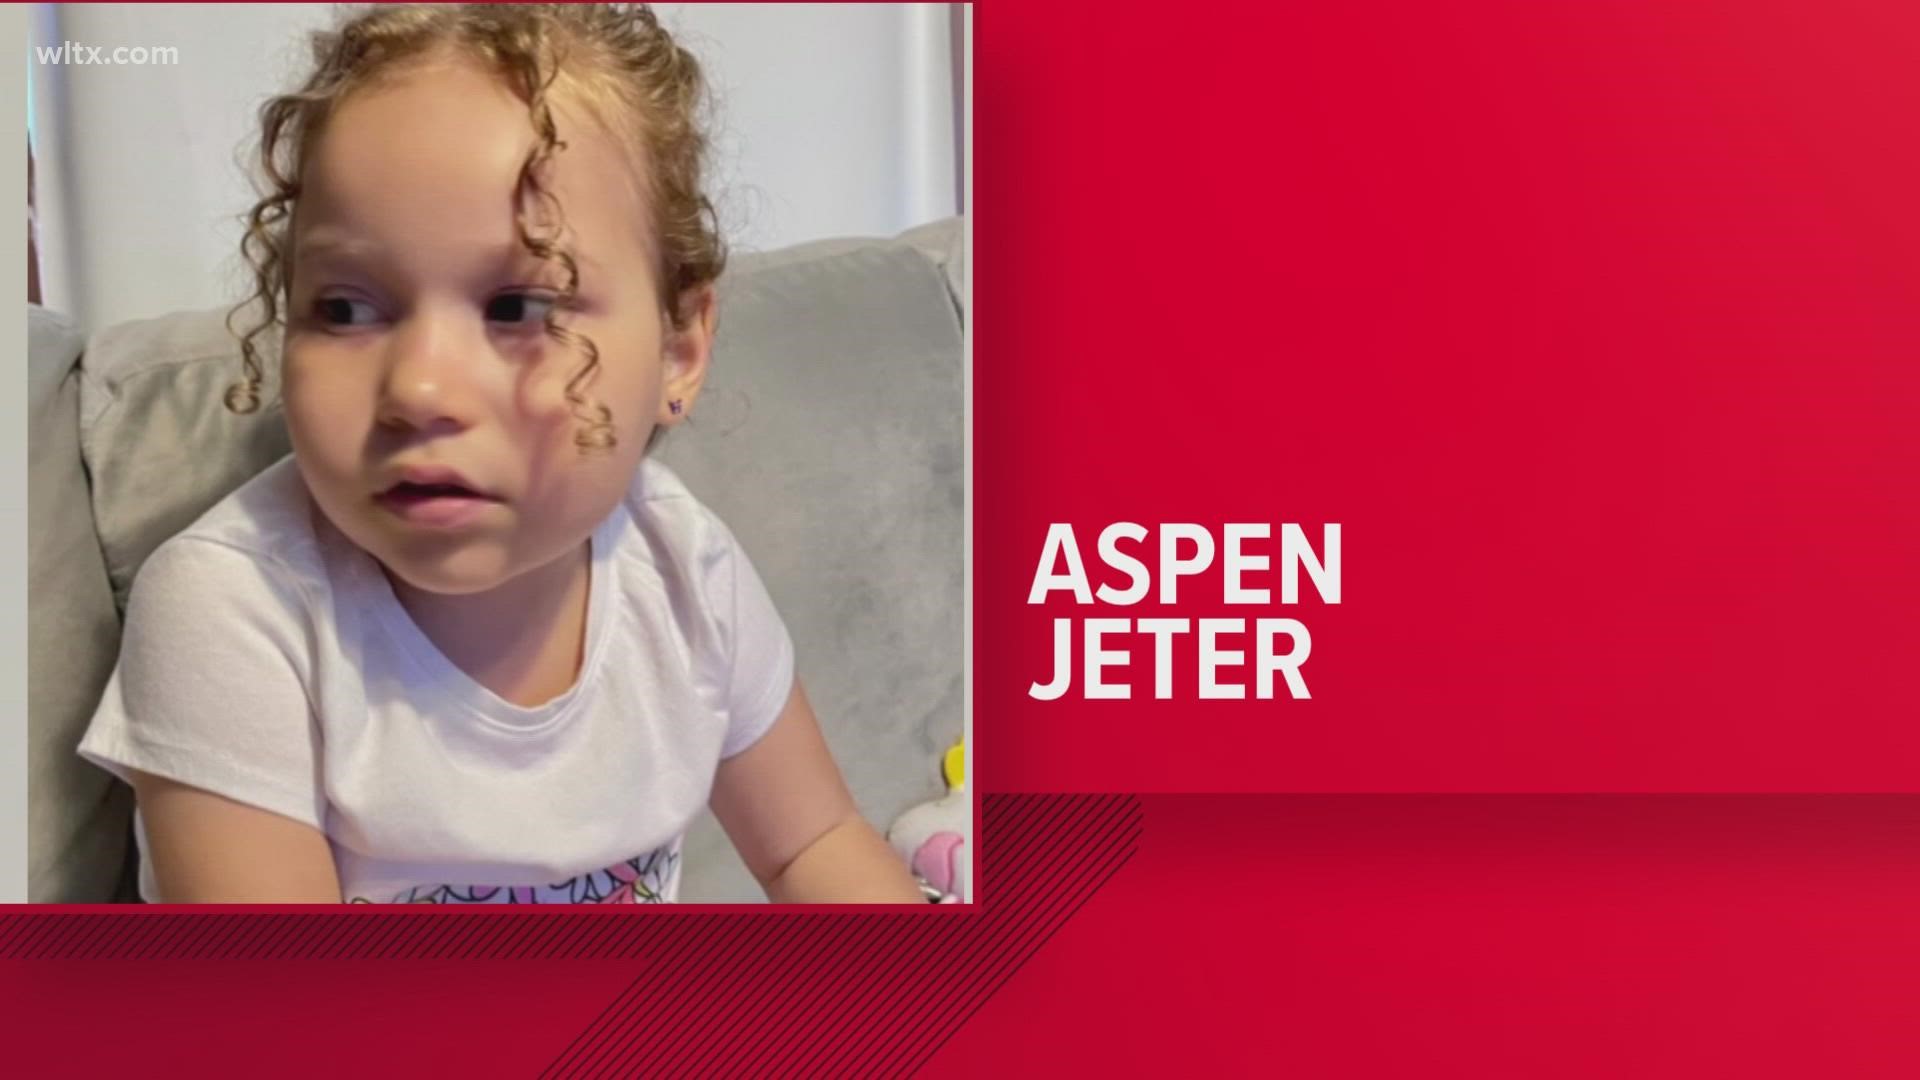 Aspen Jeter was missing after her mother was found dead on Thanksgiving day.  She was found with her father, he has been charged with murder.